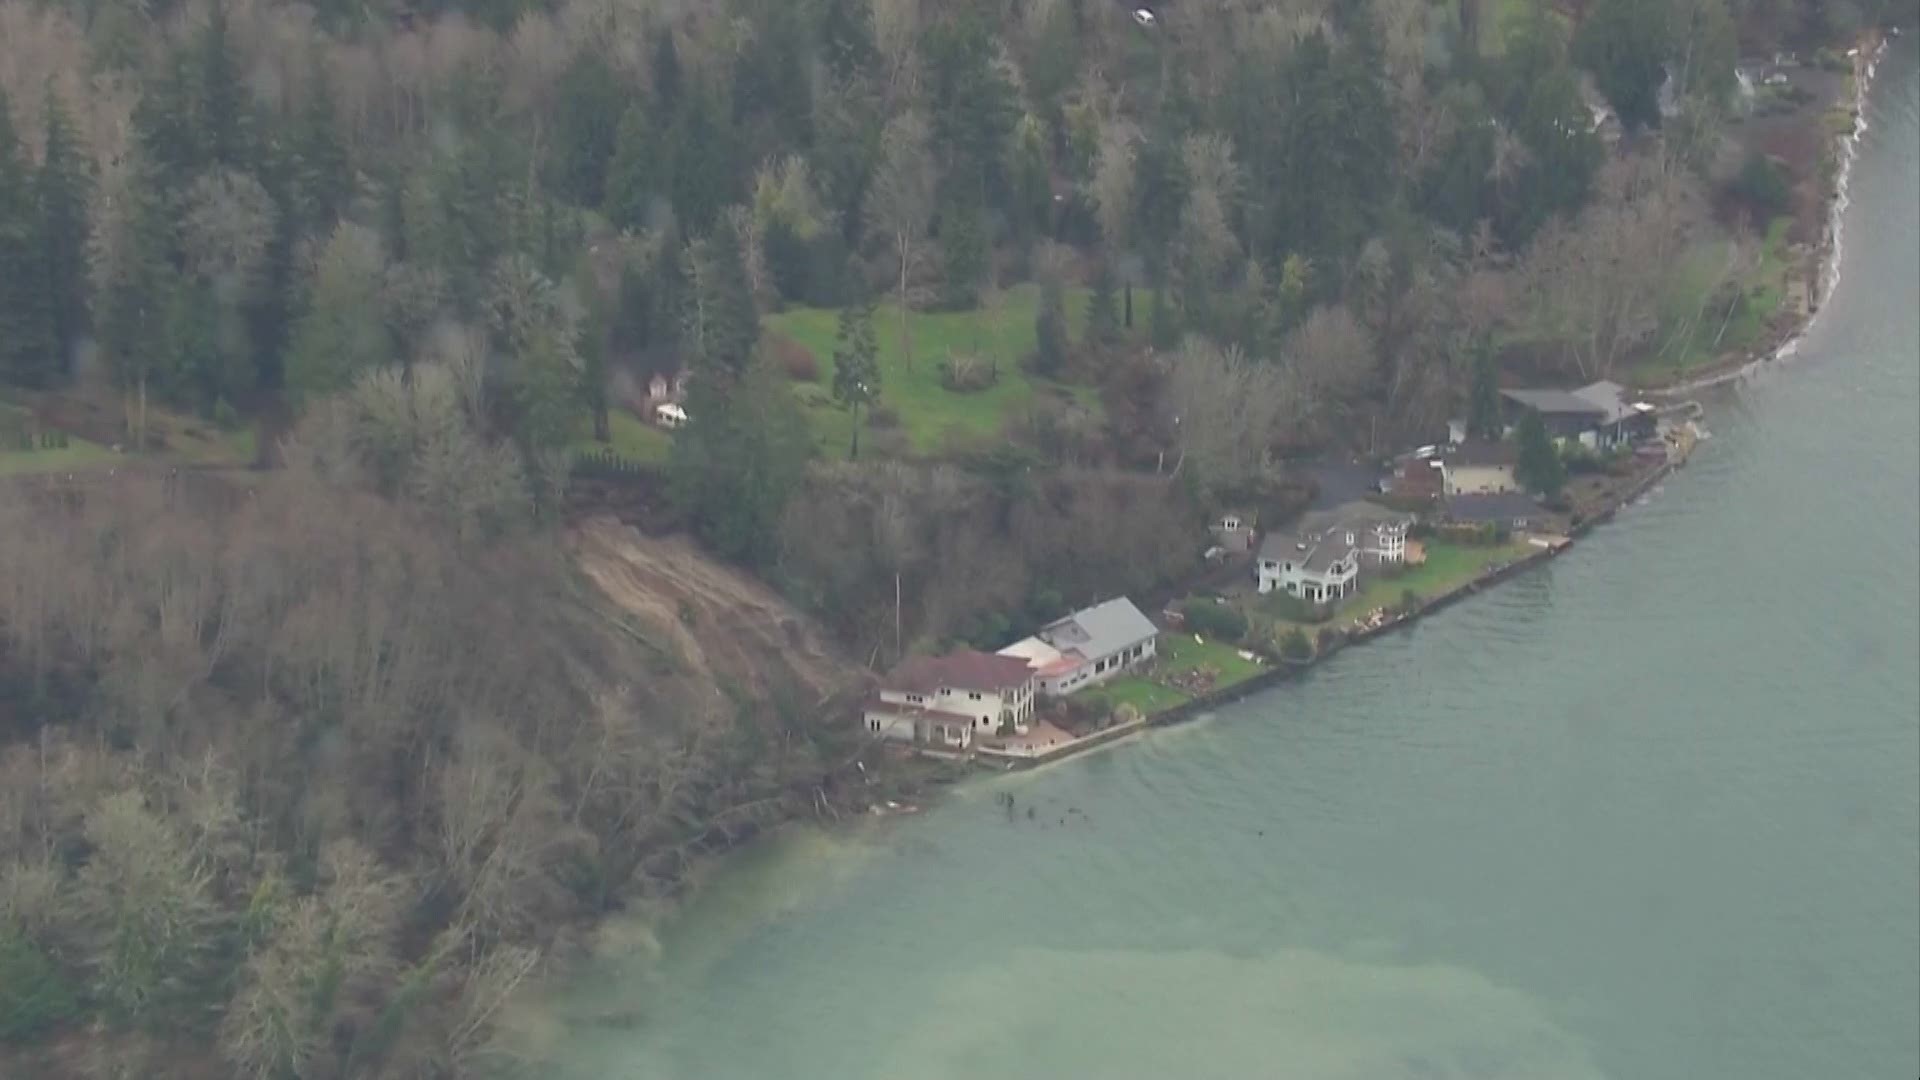 Eight homes on the Hood Canal were evacuated Monday night due to an active landslide that caused a boat house fire nearby.